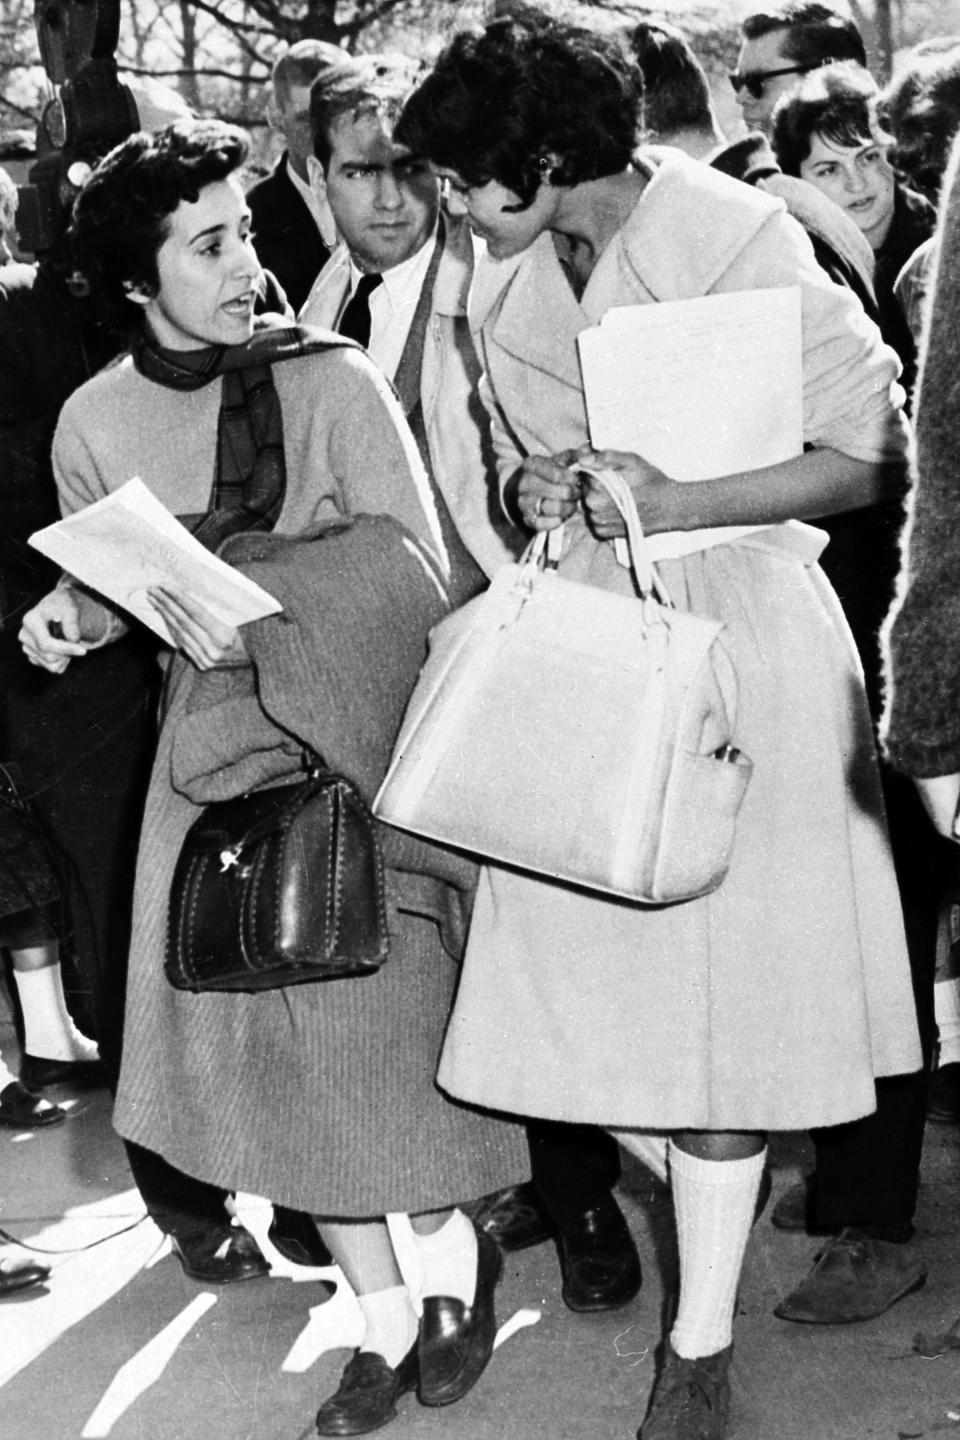 FILE - In this Jan. 11, 1961 photo, Atlanta Associated Press staffer Kathryn Johnson, left, wears bobby socks and a sweater to obtain the only eyewitness story of Charlayne Hunter's first day of class at the University of Georgia, in Athens, Ga. School officials stopped all other reporters at the door but Johnson, who appeared to look like "just another student." Hunter was one of the first two African American students to enroll at the University of Georgia. Johnson, a trailblazing reporter for The Associated Press died Wednesday, Oct. 23, 2019, in Atlanta at the age of 93. (AP Photo)